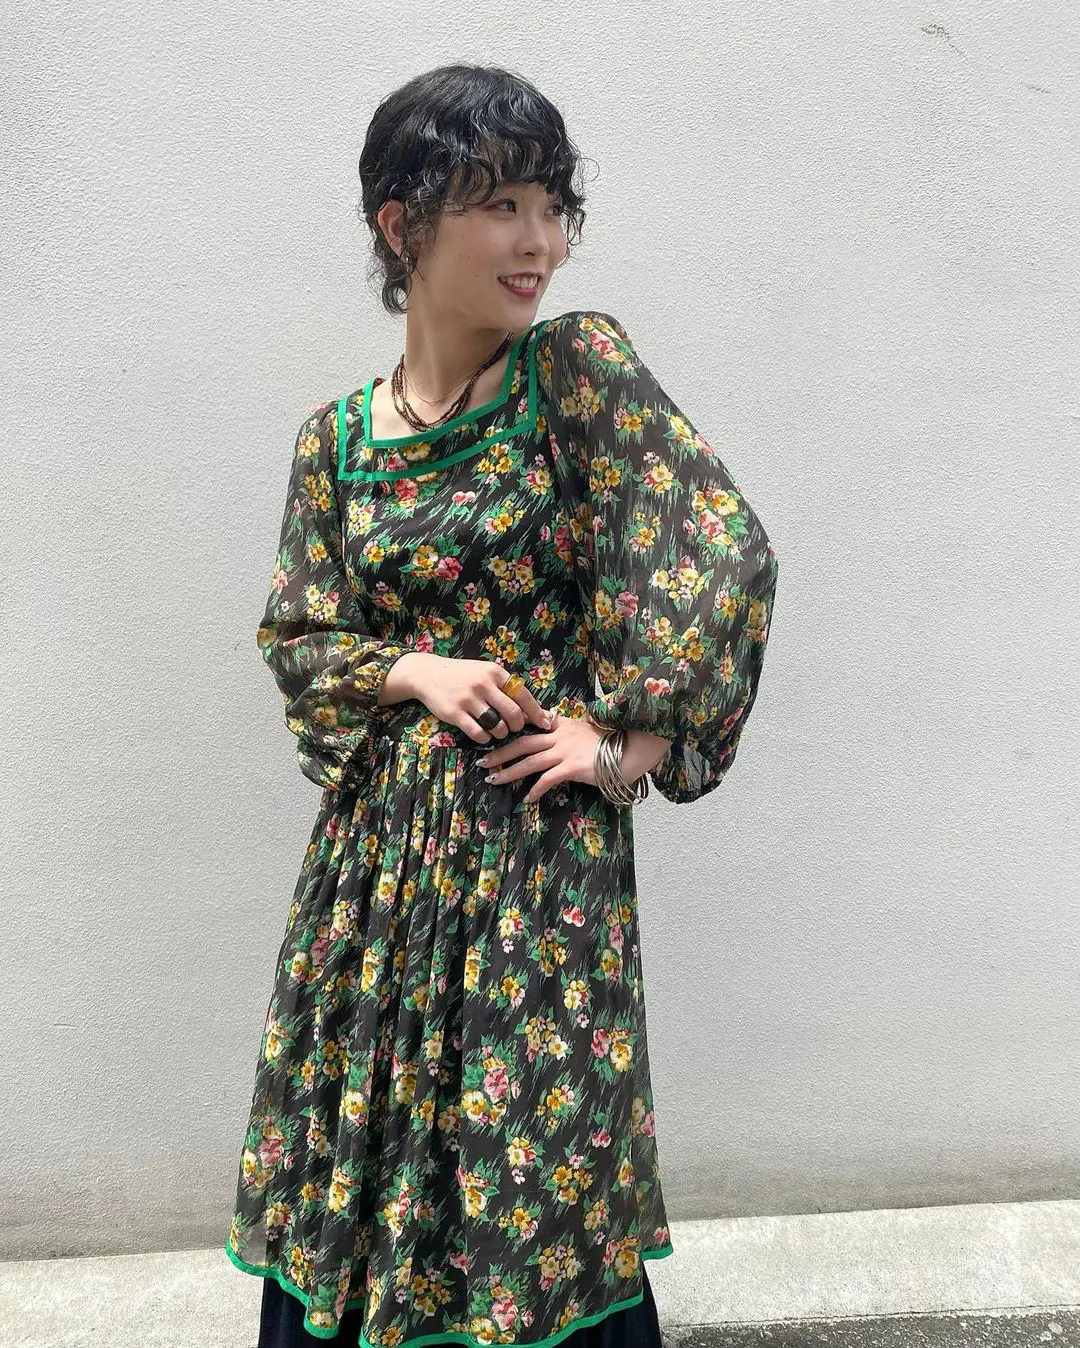 ❤️New❤️18 vintage ヴィンテージ レトロ 柄 シャツワンピース